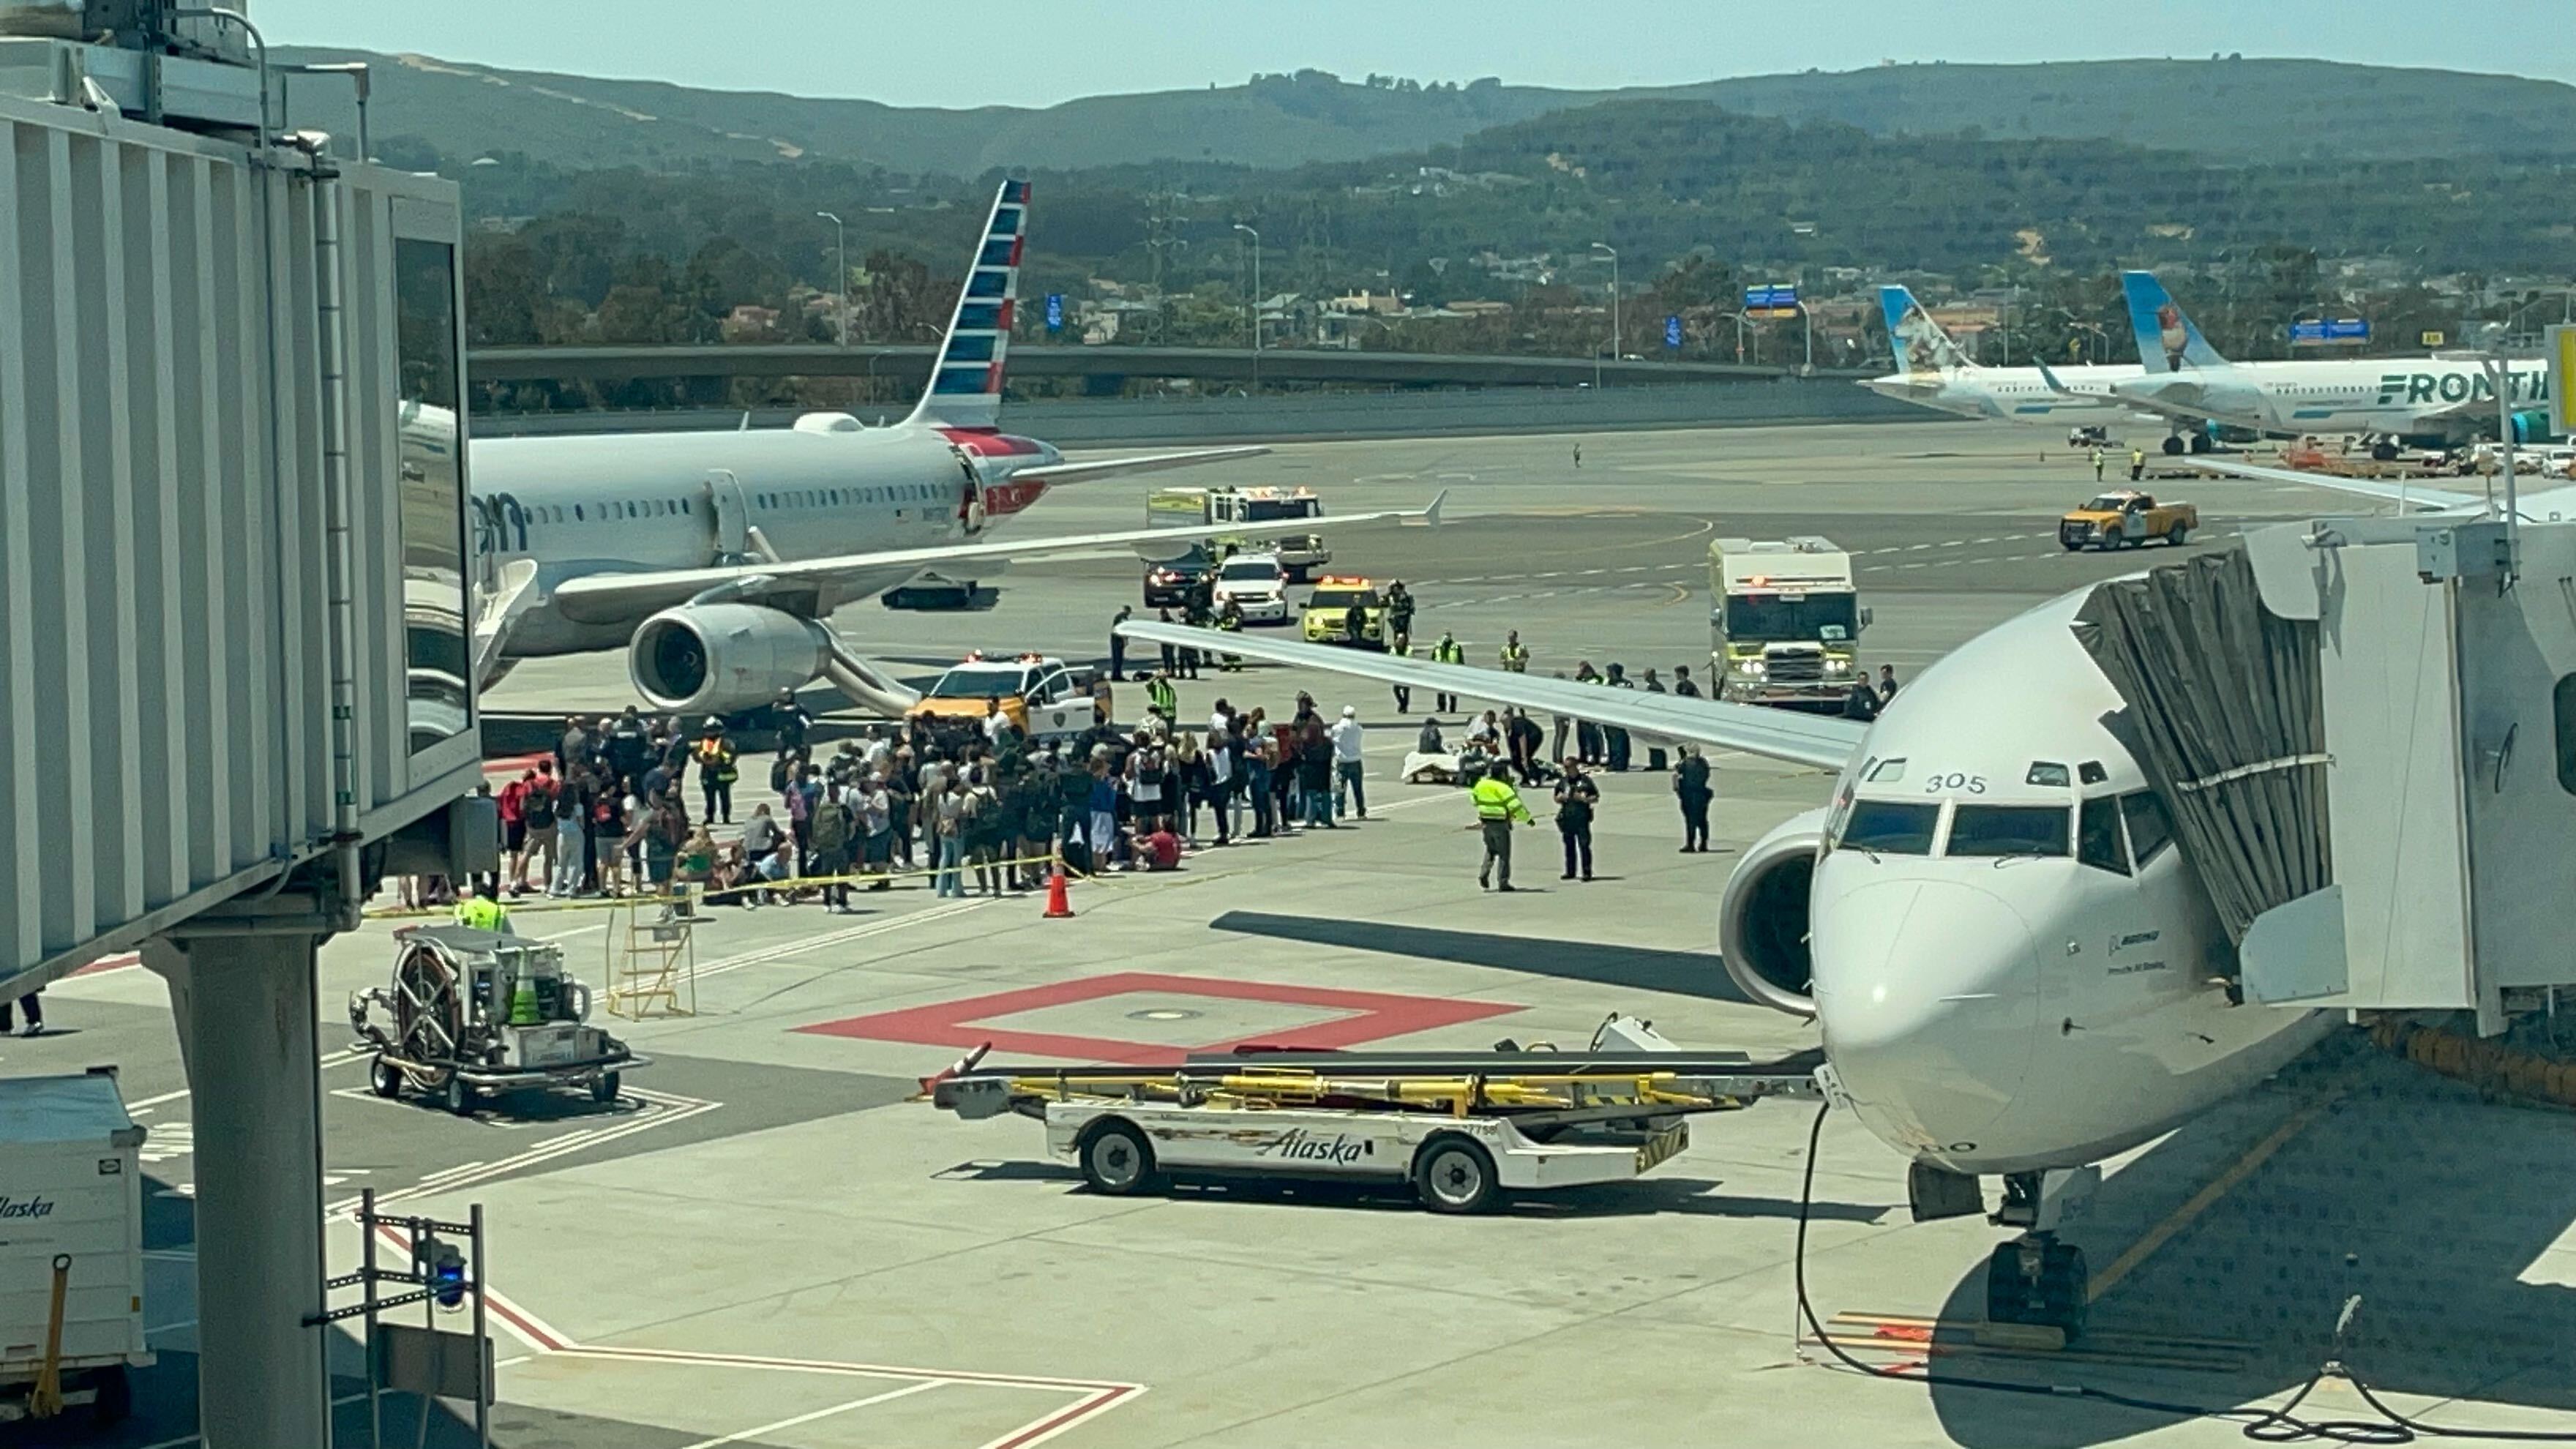 Smoke from passenger's laptop prompts plane evacuation at SFO